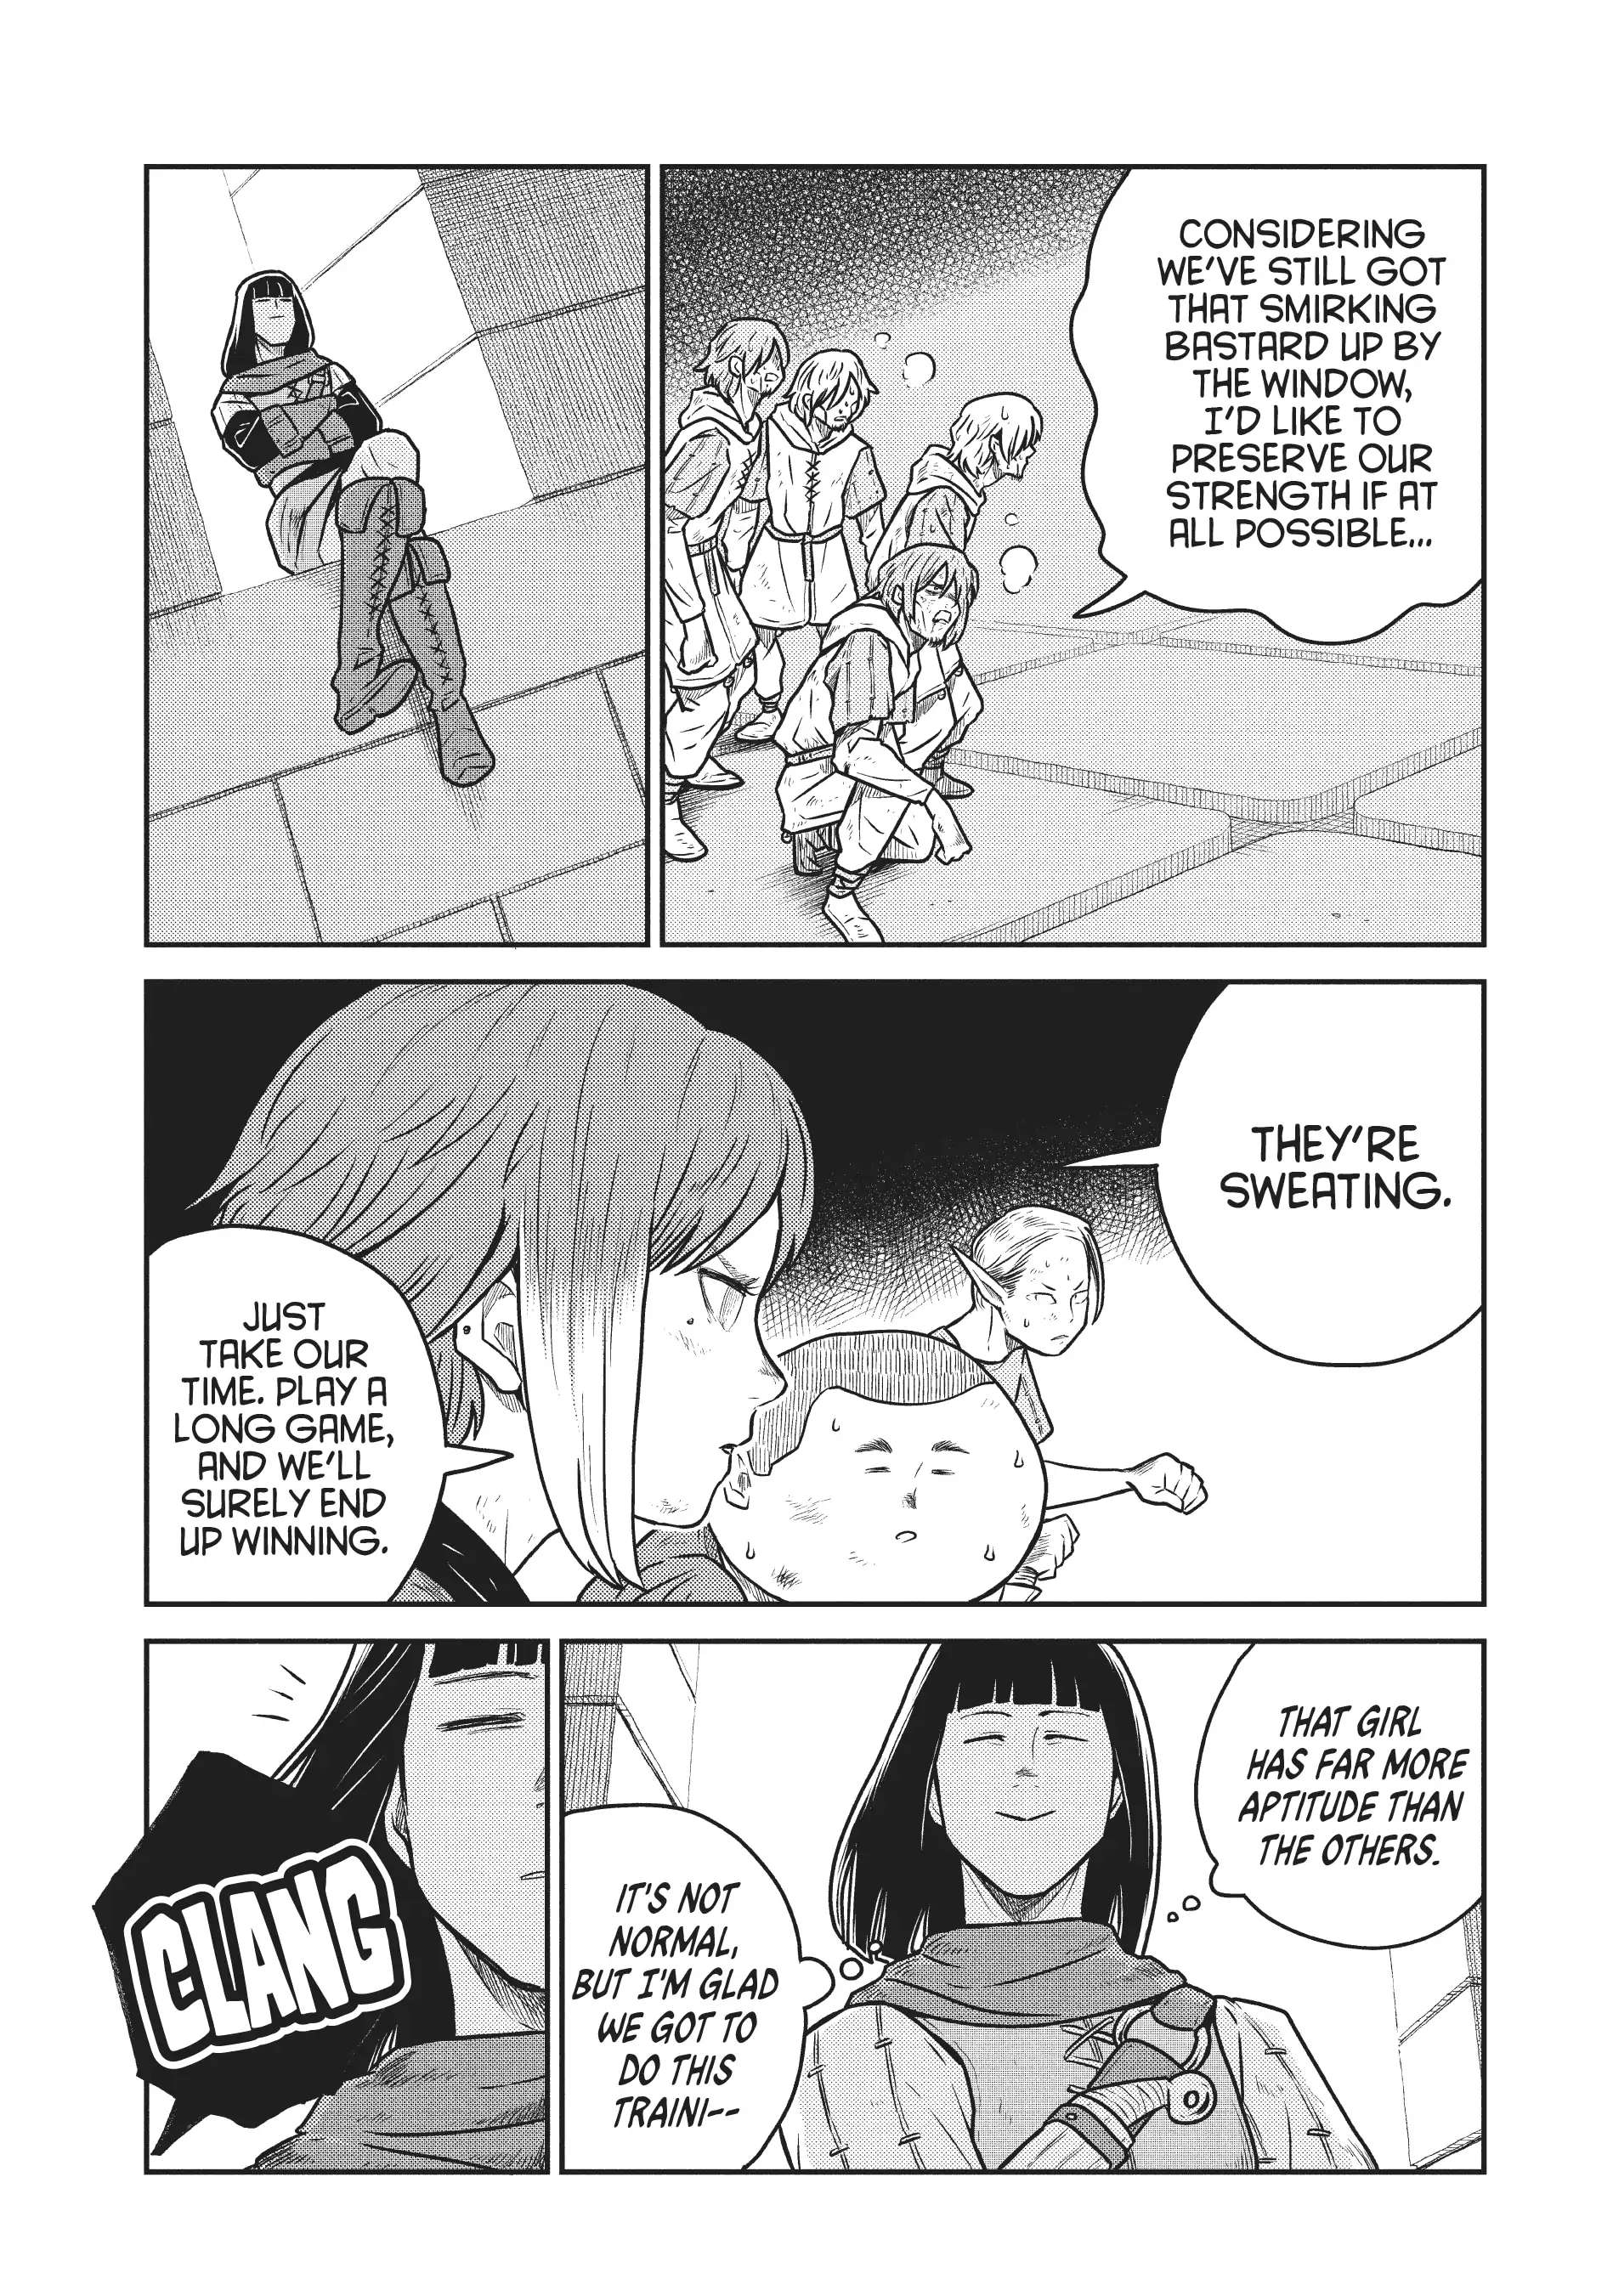 Quality Assurance In Another World - Page 2